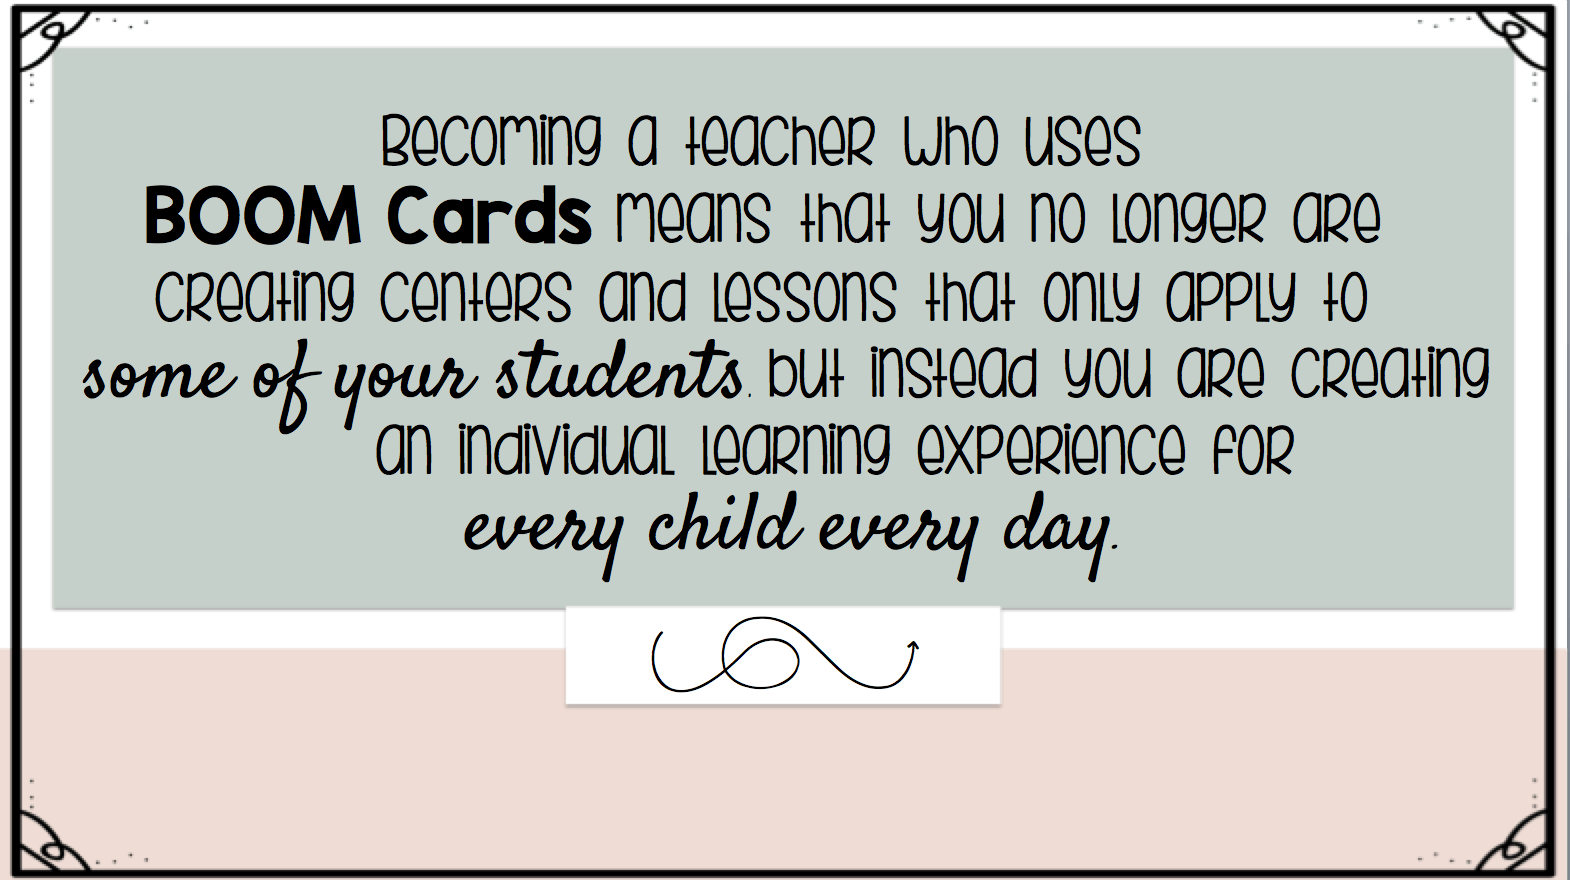 Boom cards help create a learning experience for every child